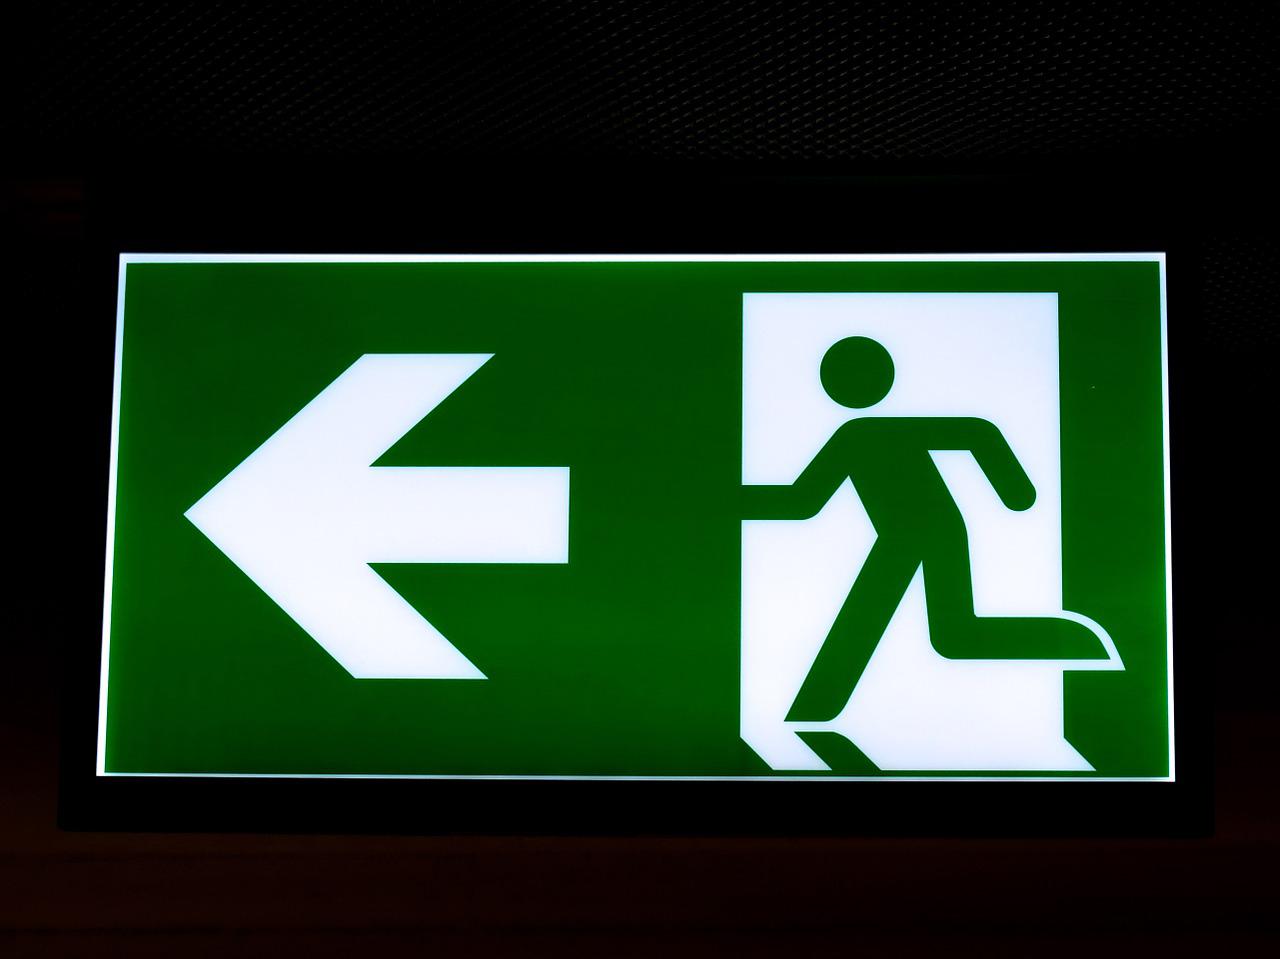 Image of Exit Sign by Hebi B. from Pixabay 